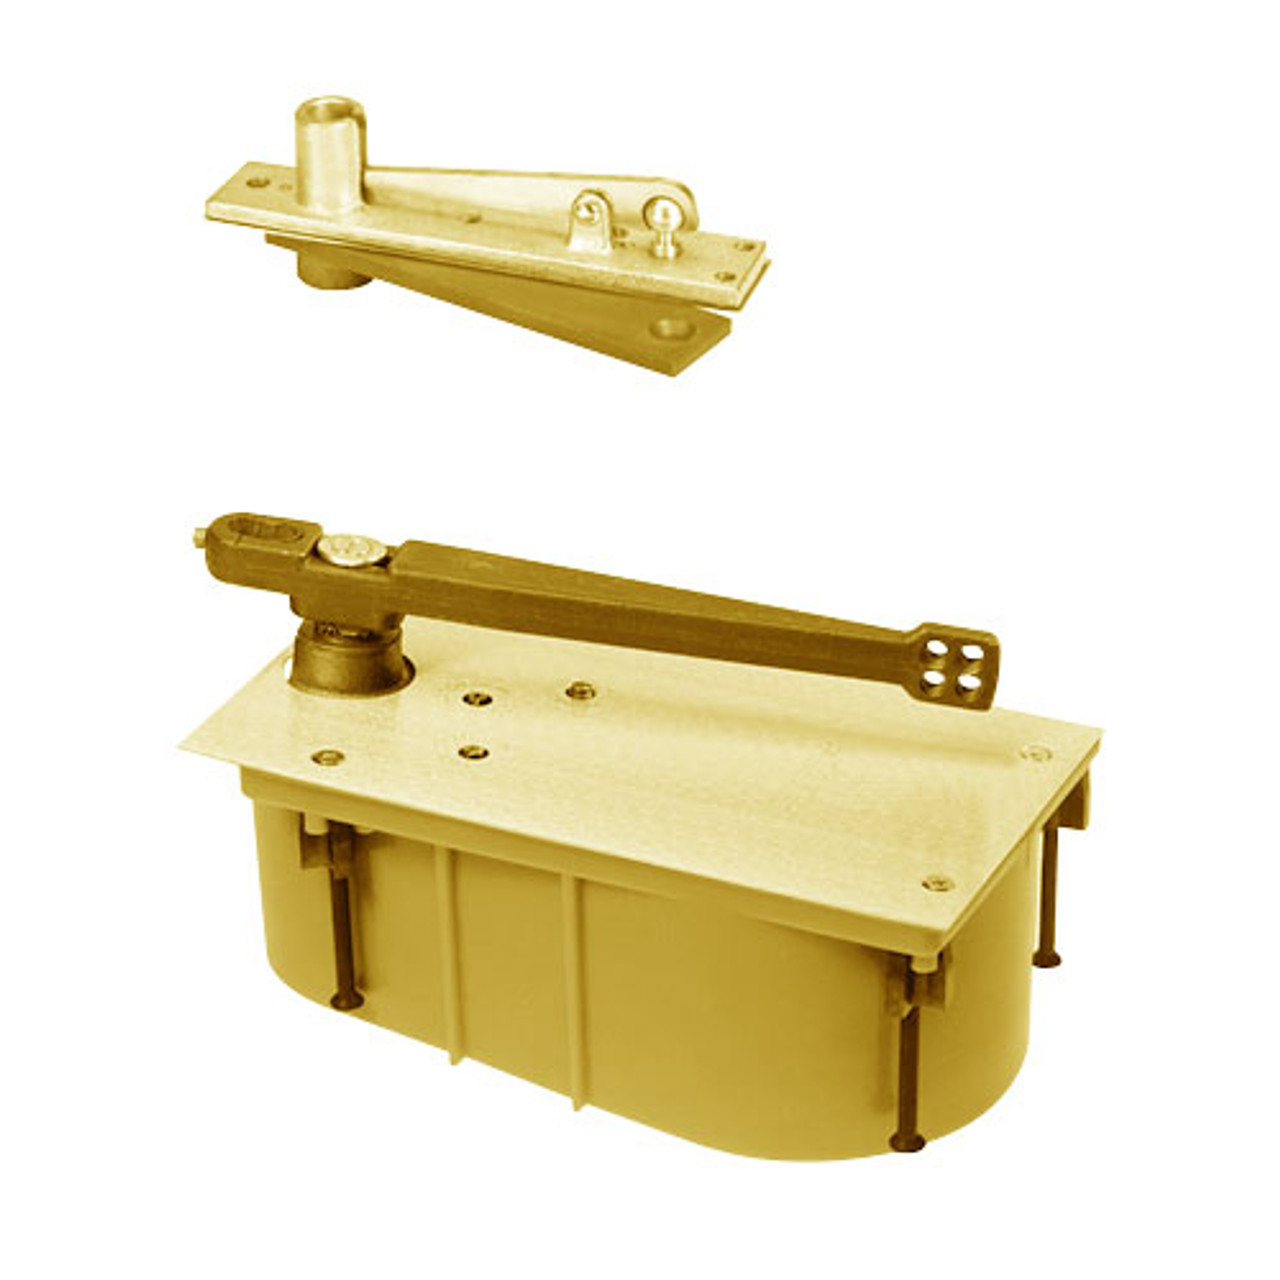 PH28-95N-CWF-LH-605 Rixson 28 Series Heavy Duty Single Acting Center Hung Floor Closer in Bright Brass Finish